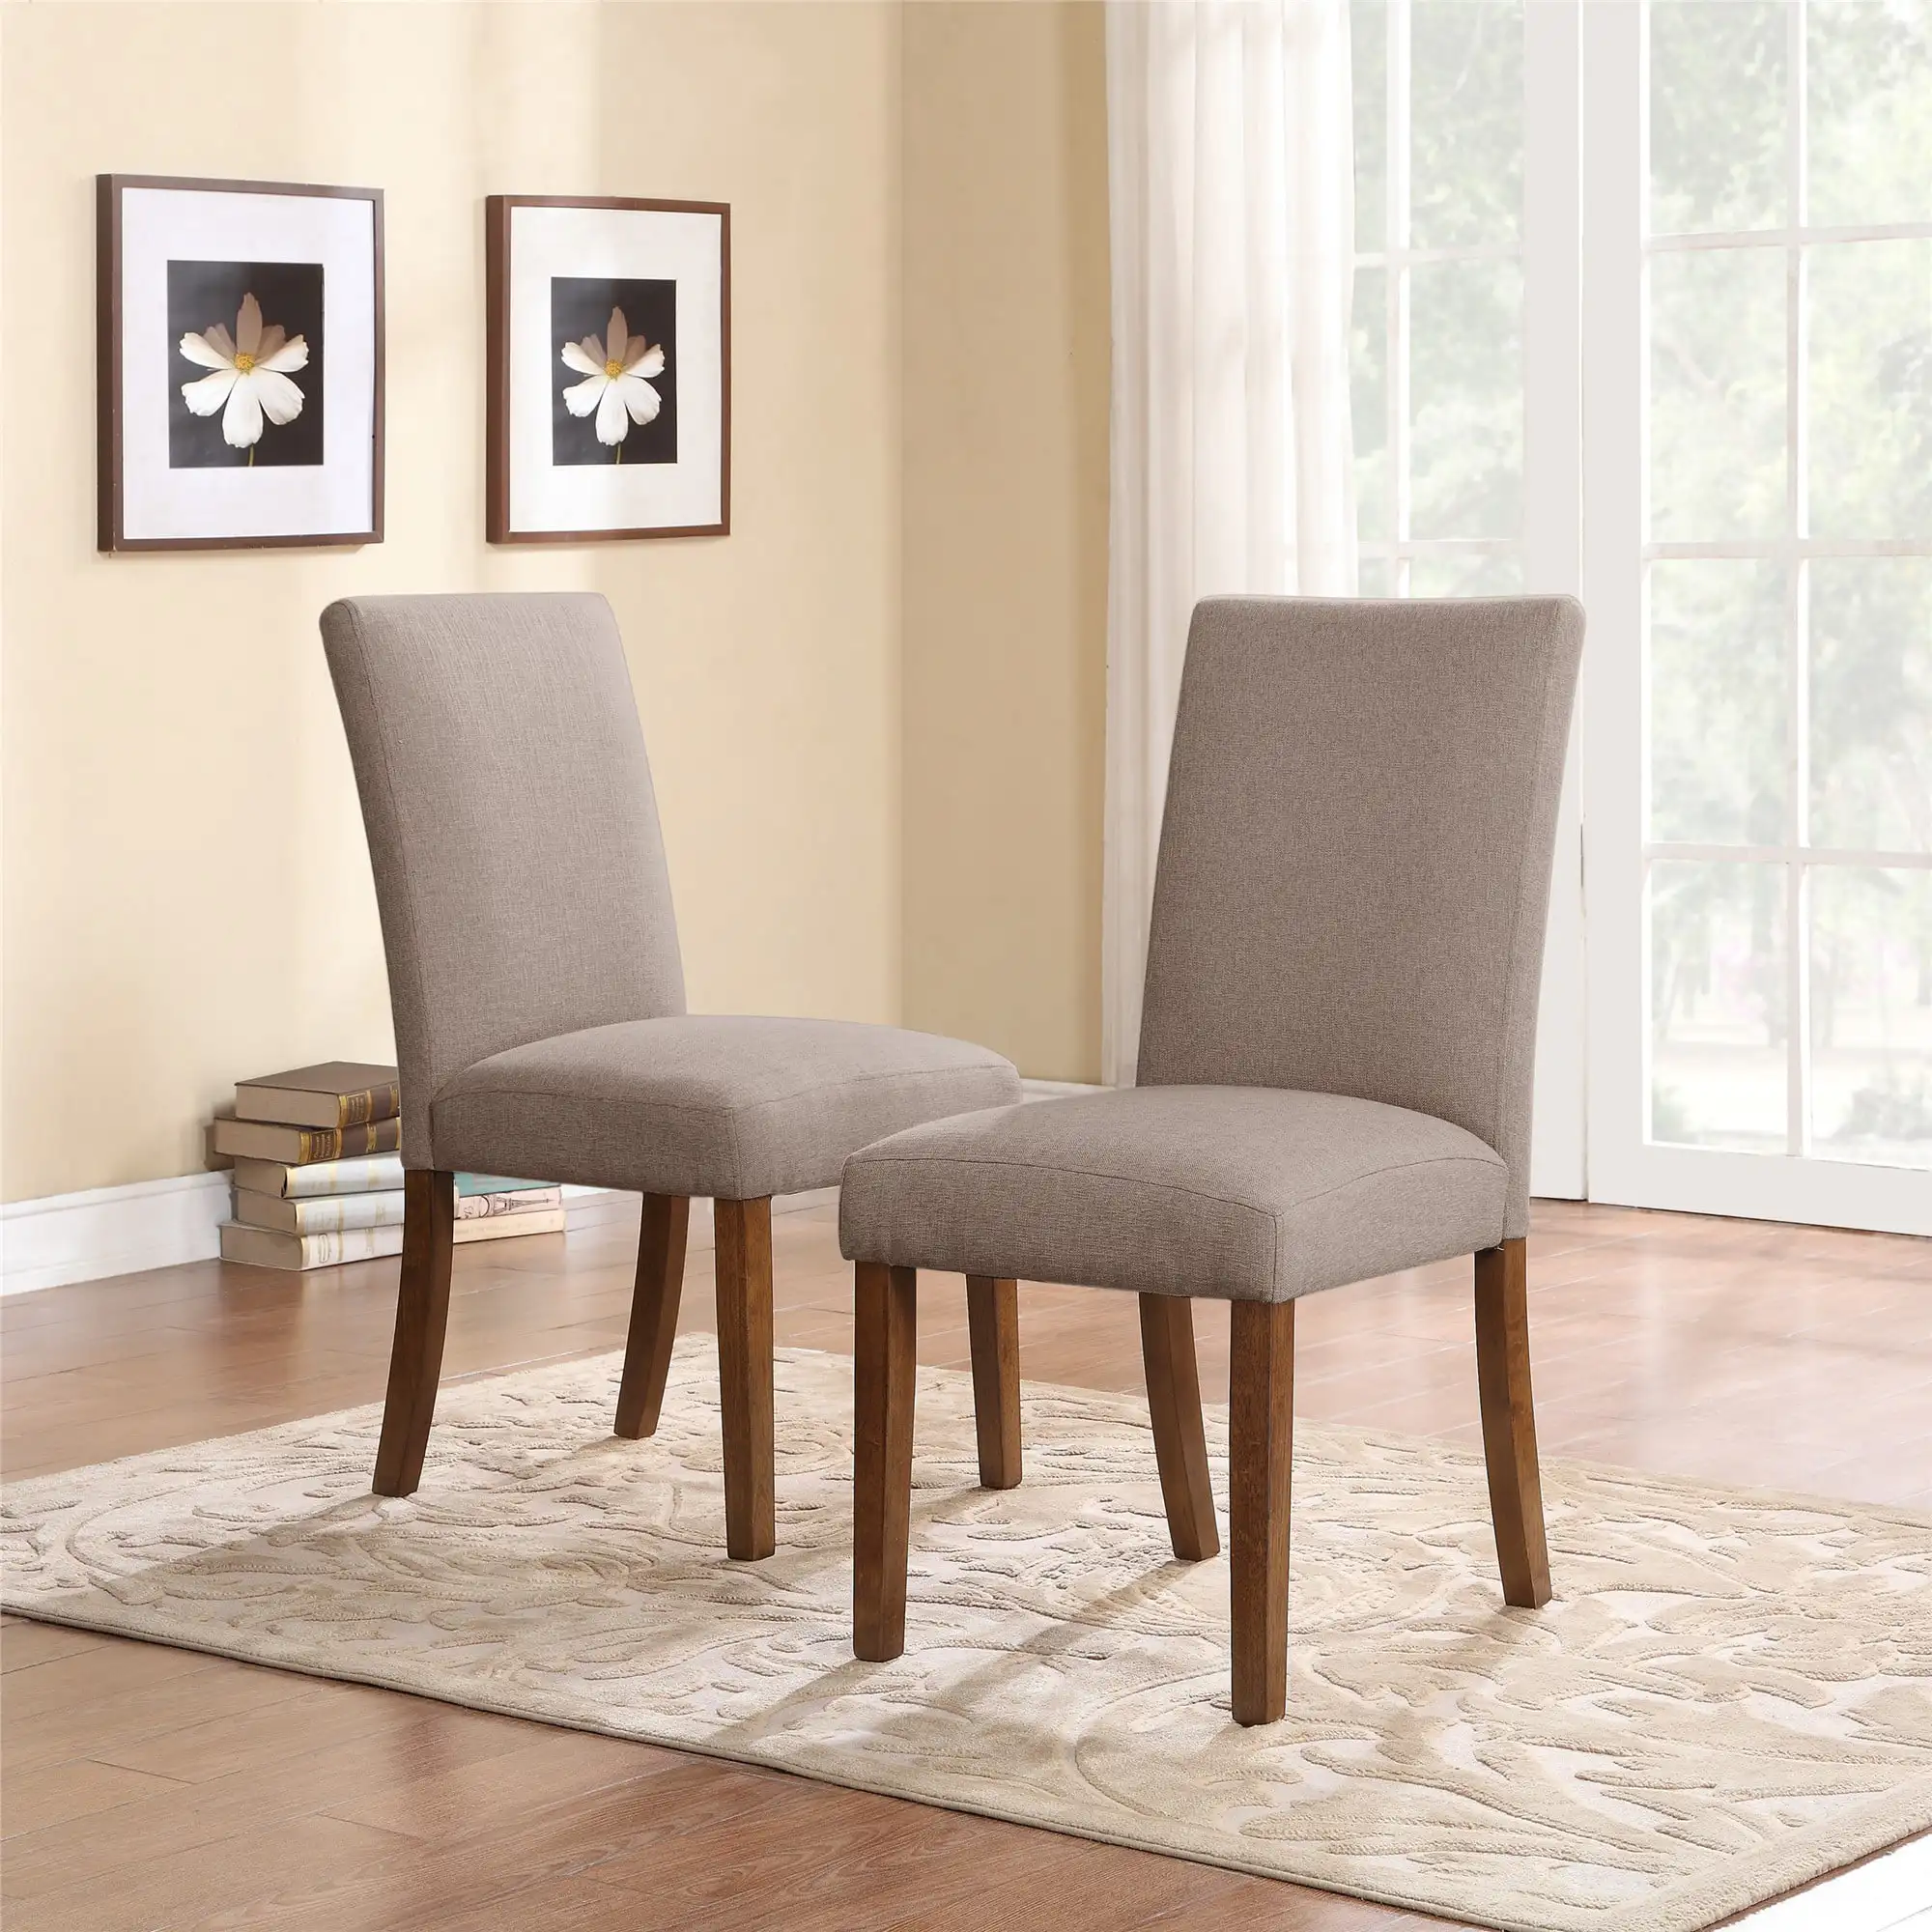 

DHP Linen Upholstered Parsons Chairs, Set of 2, Taupe/Pine